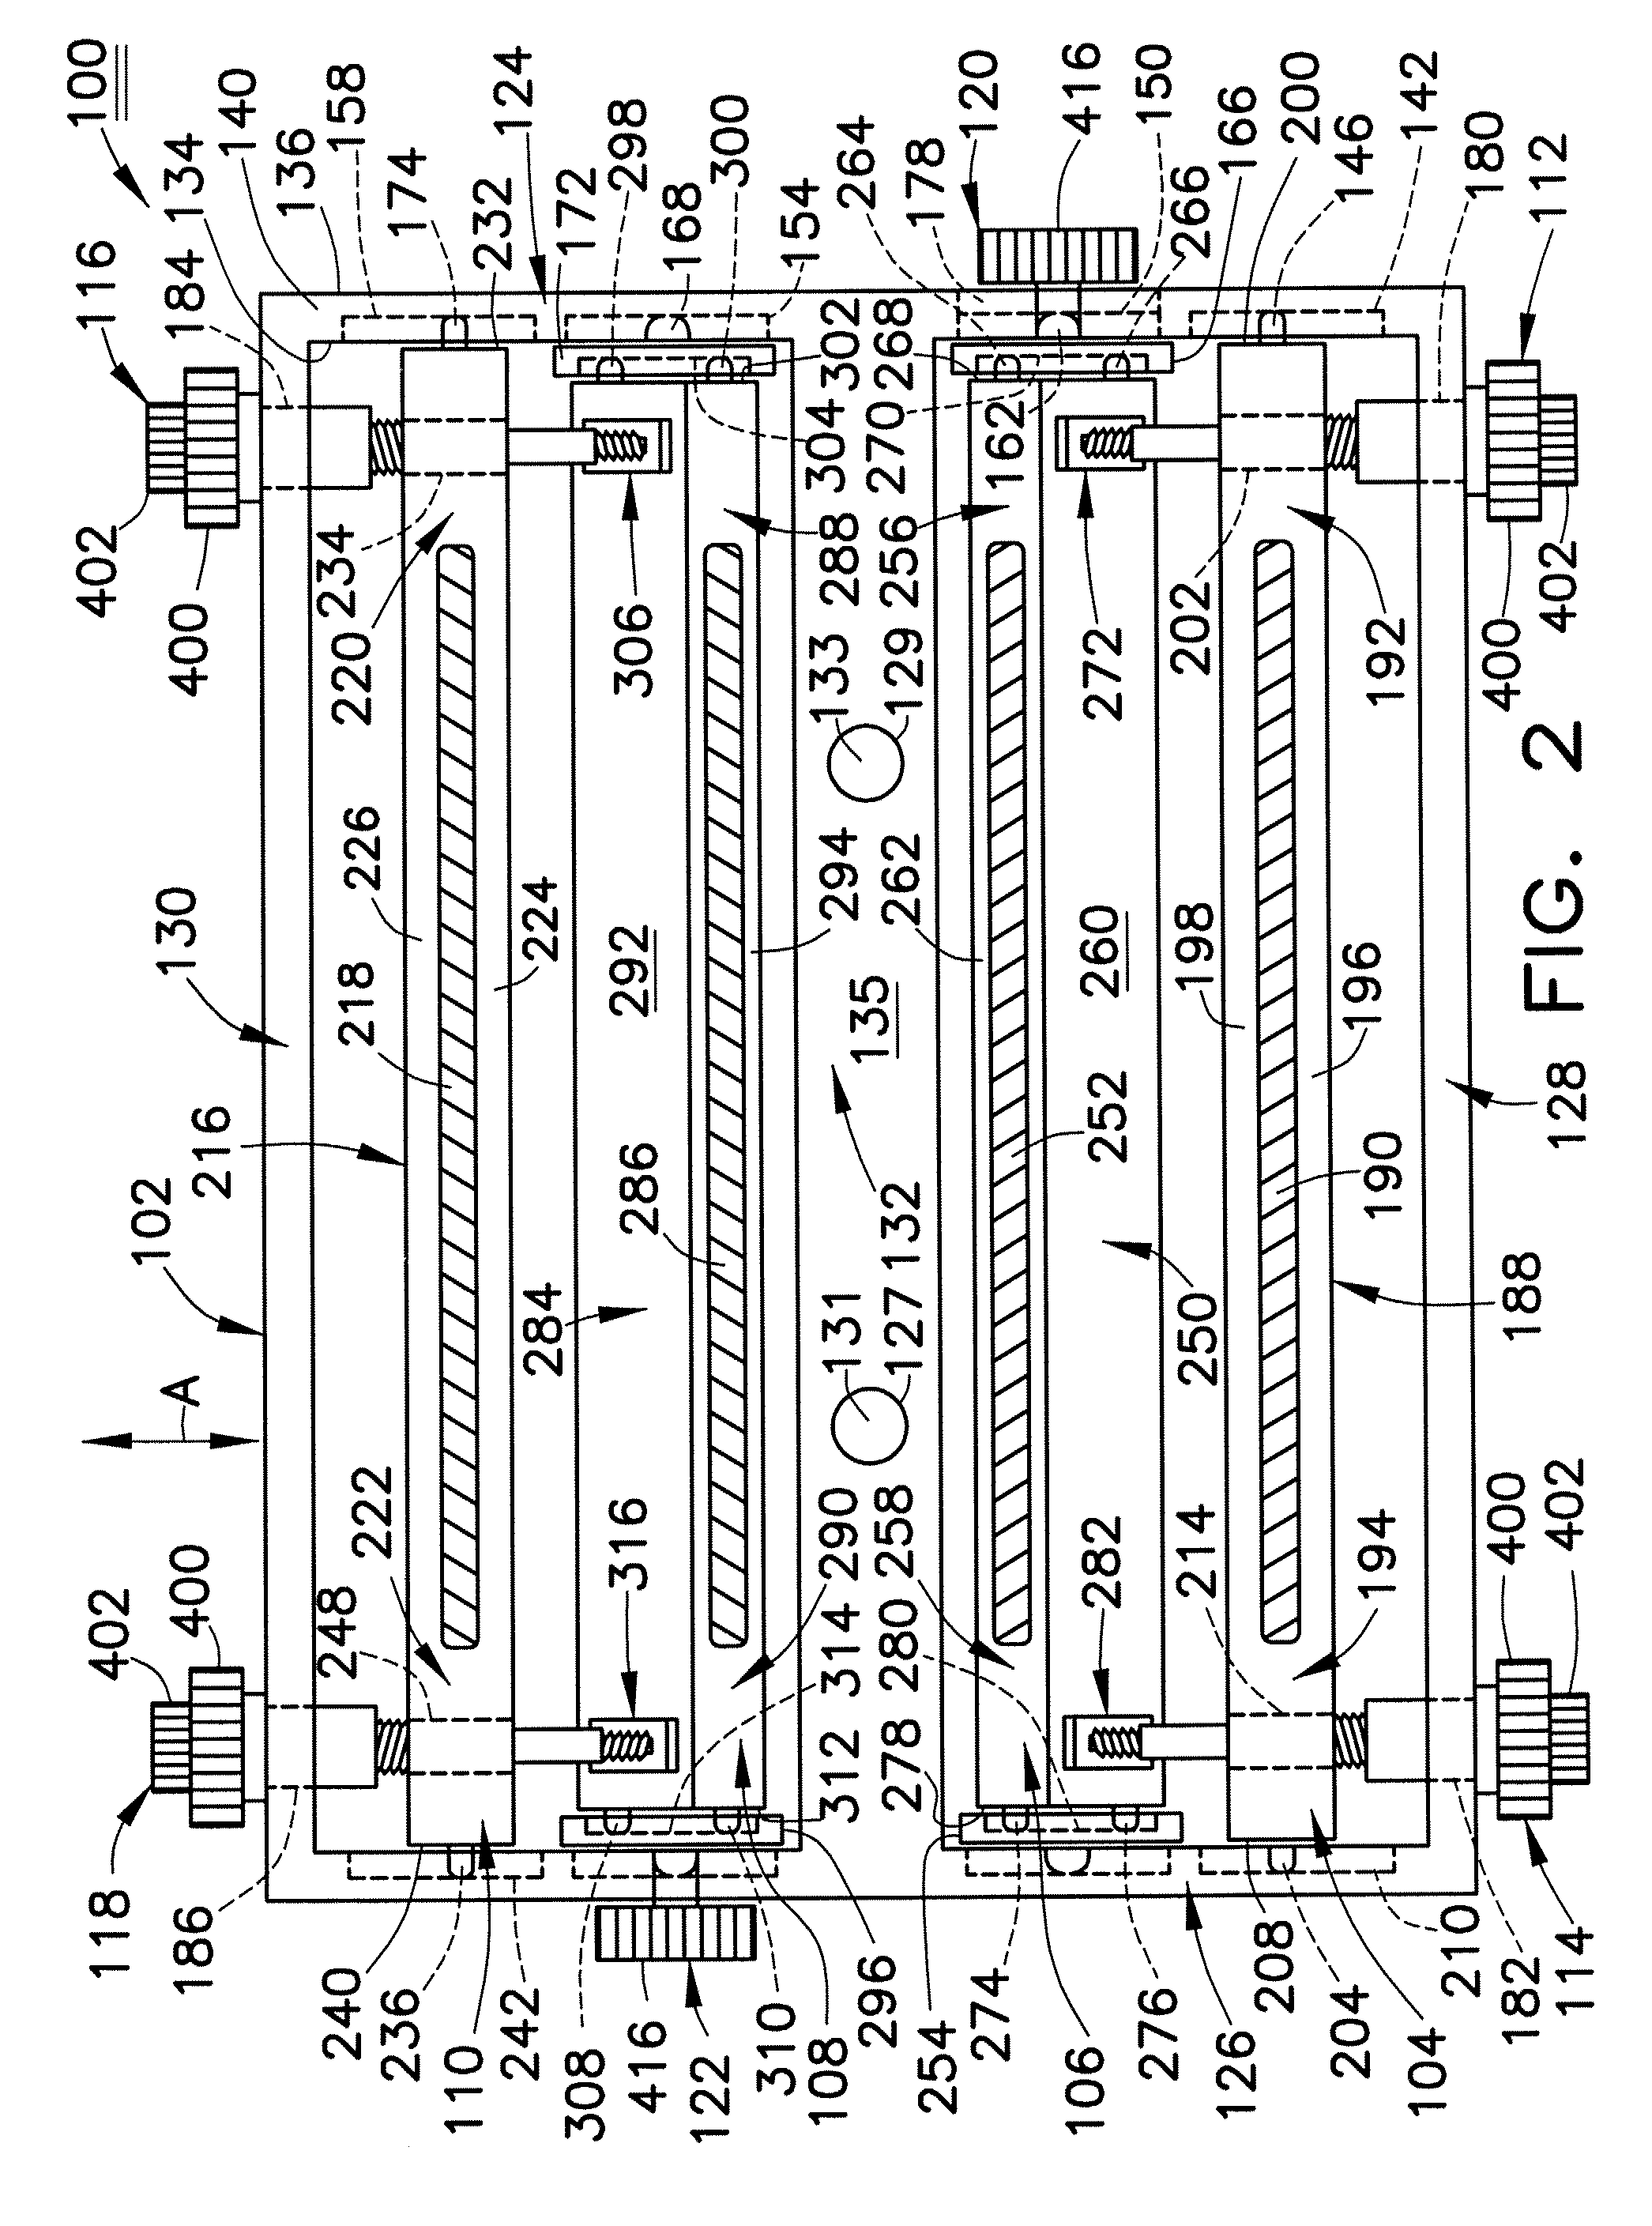 Method, apparatus, and system for image guided bone cutting